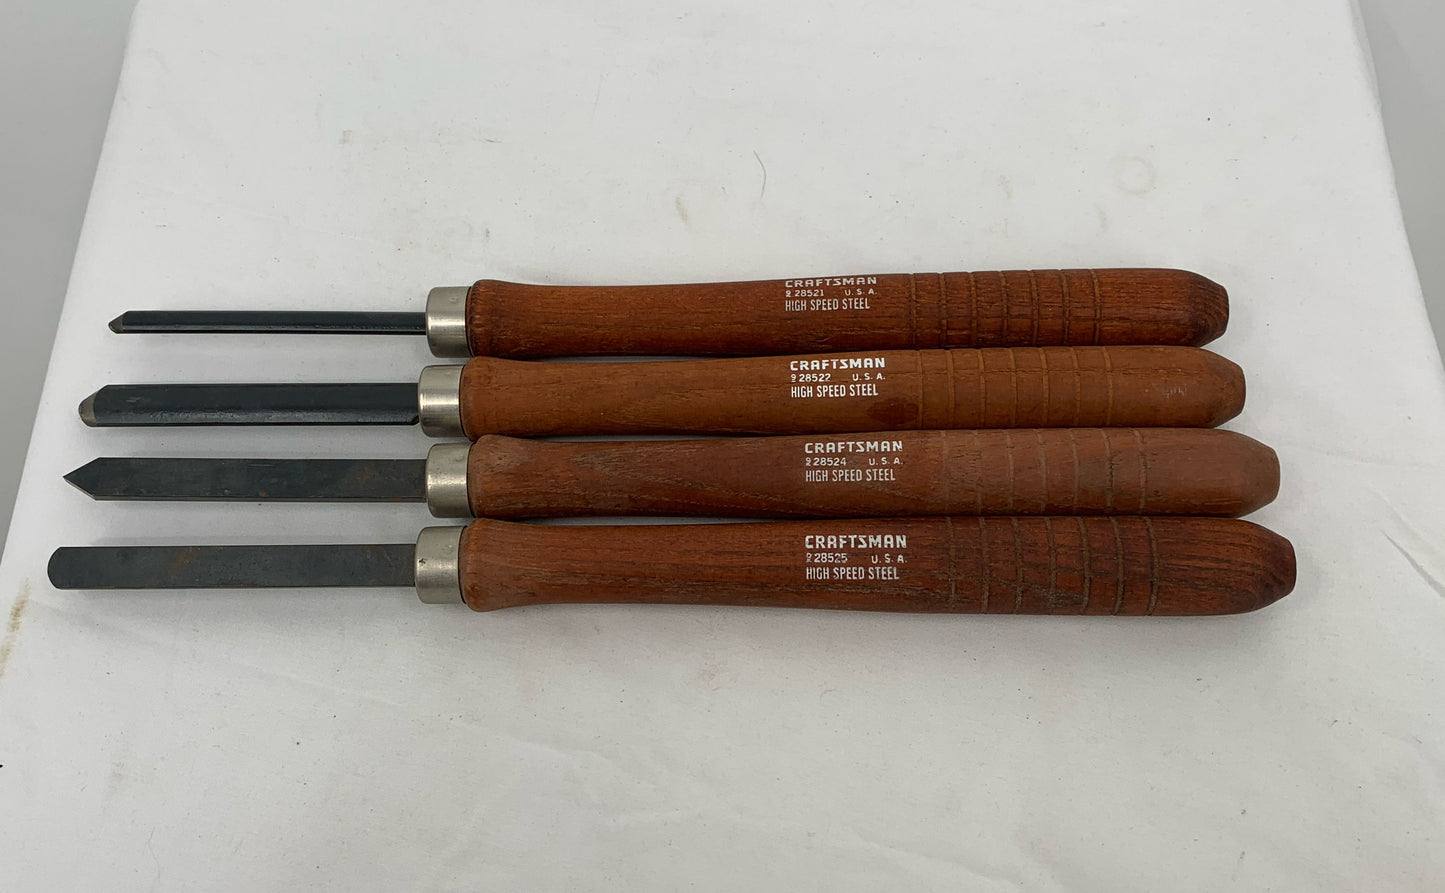 Craftsman High Speed Steel Lathe Lot Of 4 Made In The U.S.A.